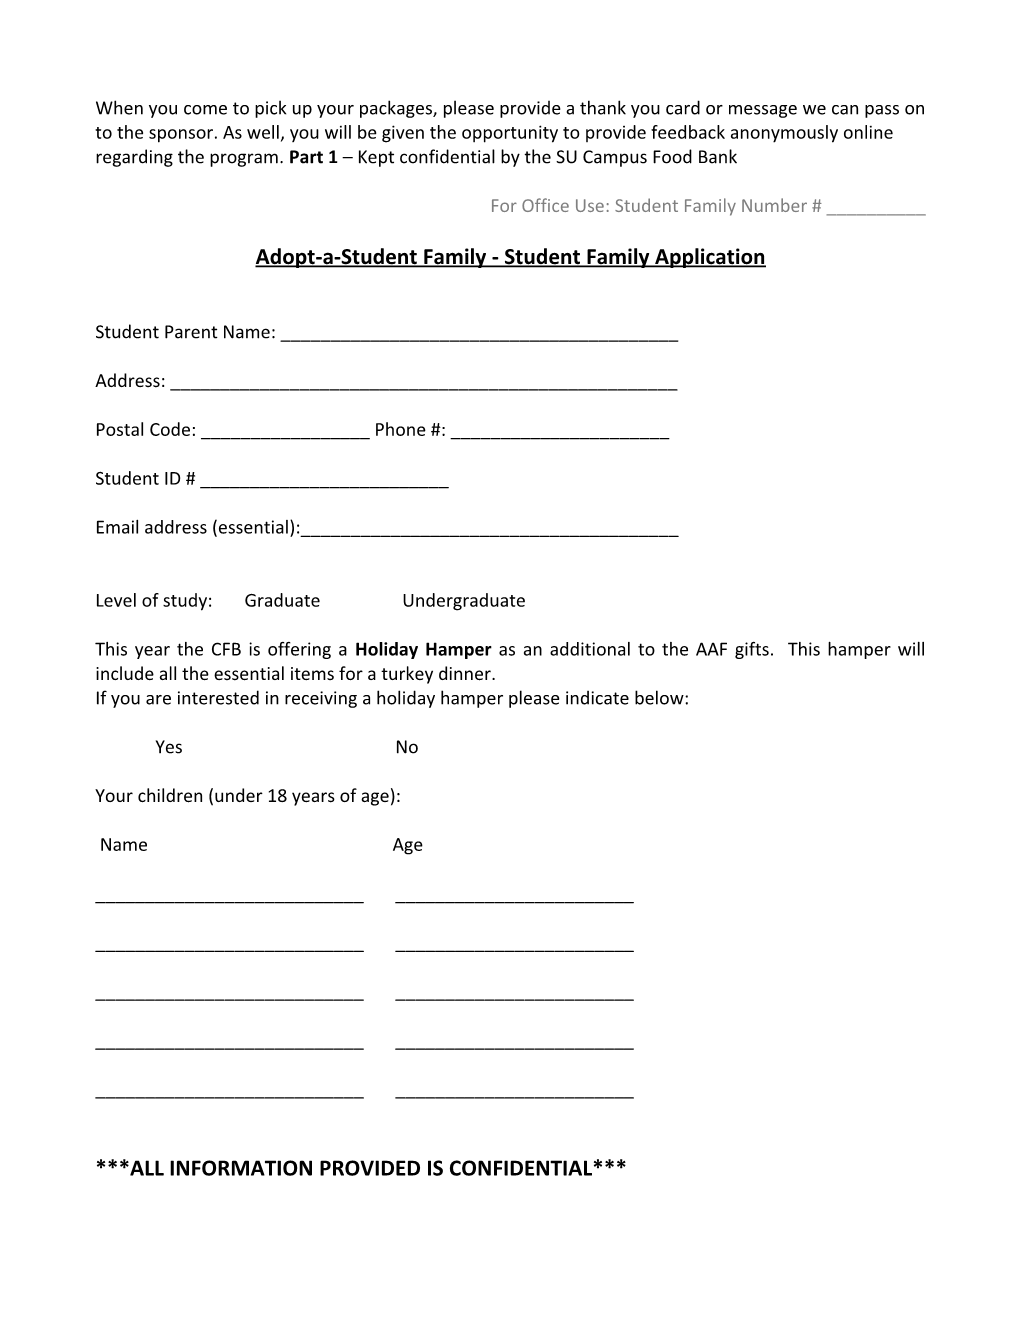 Adopt-A-Student Family - Family Application Package